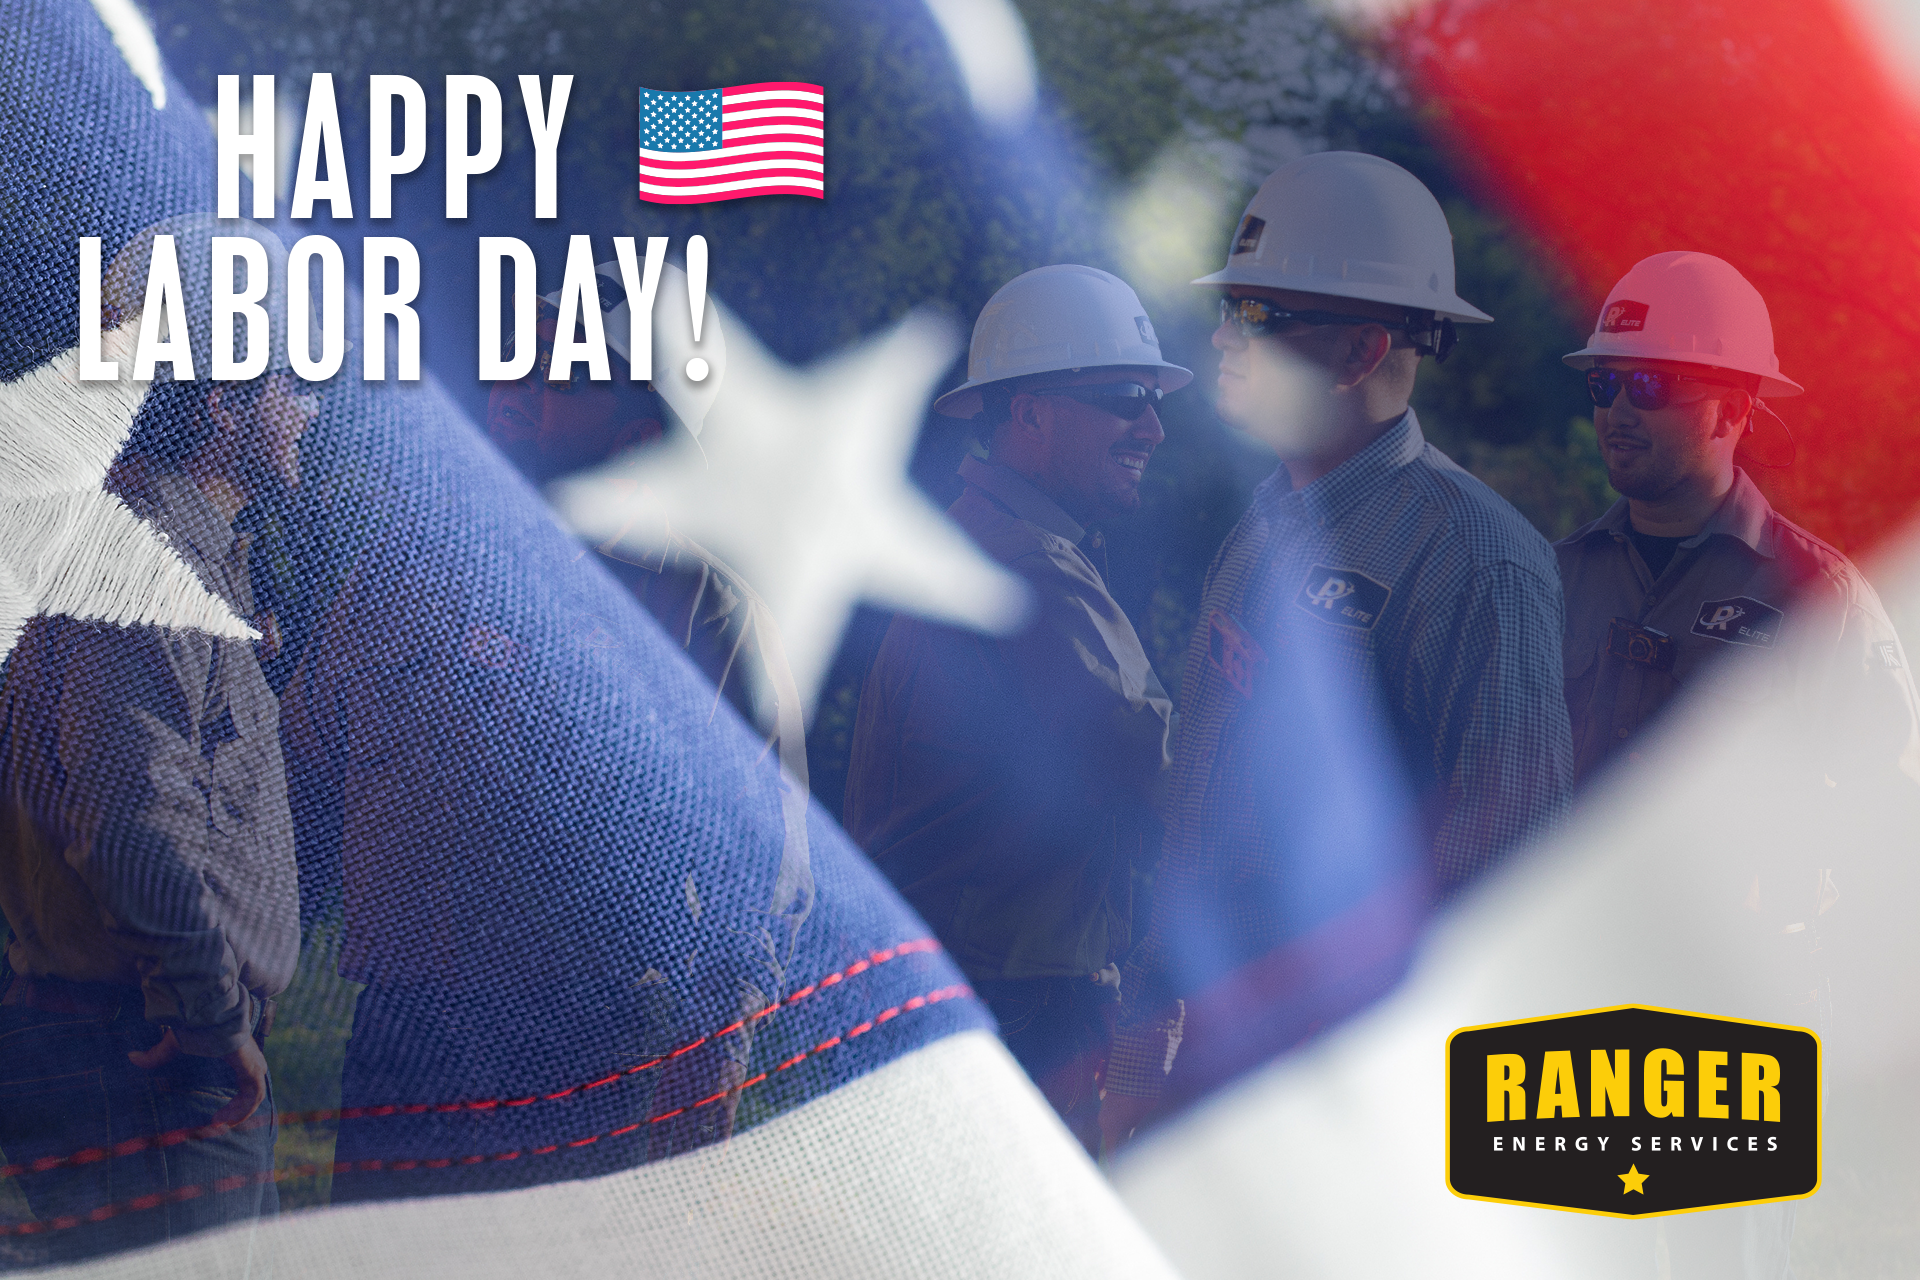 Happy Labor Day weekend from Ranger Energy Services